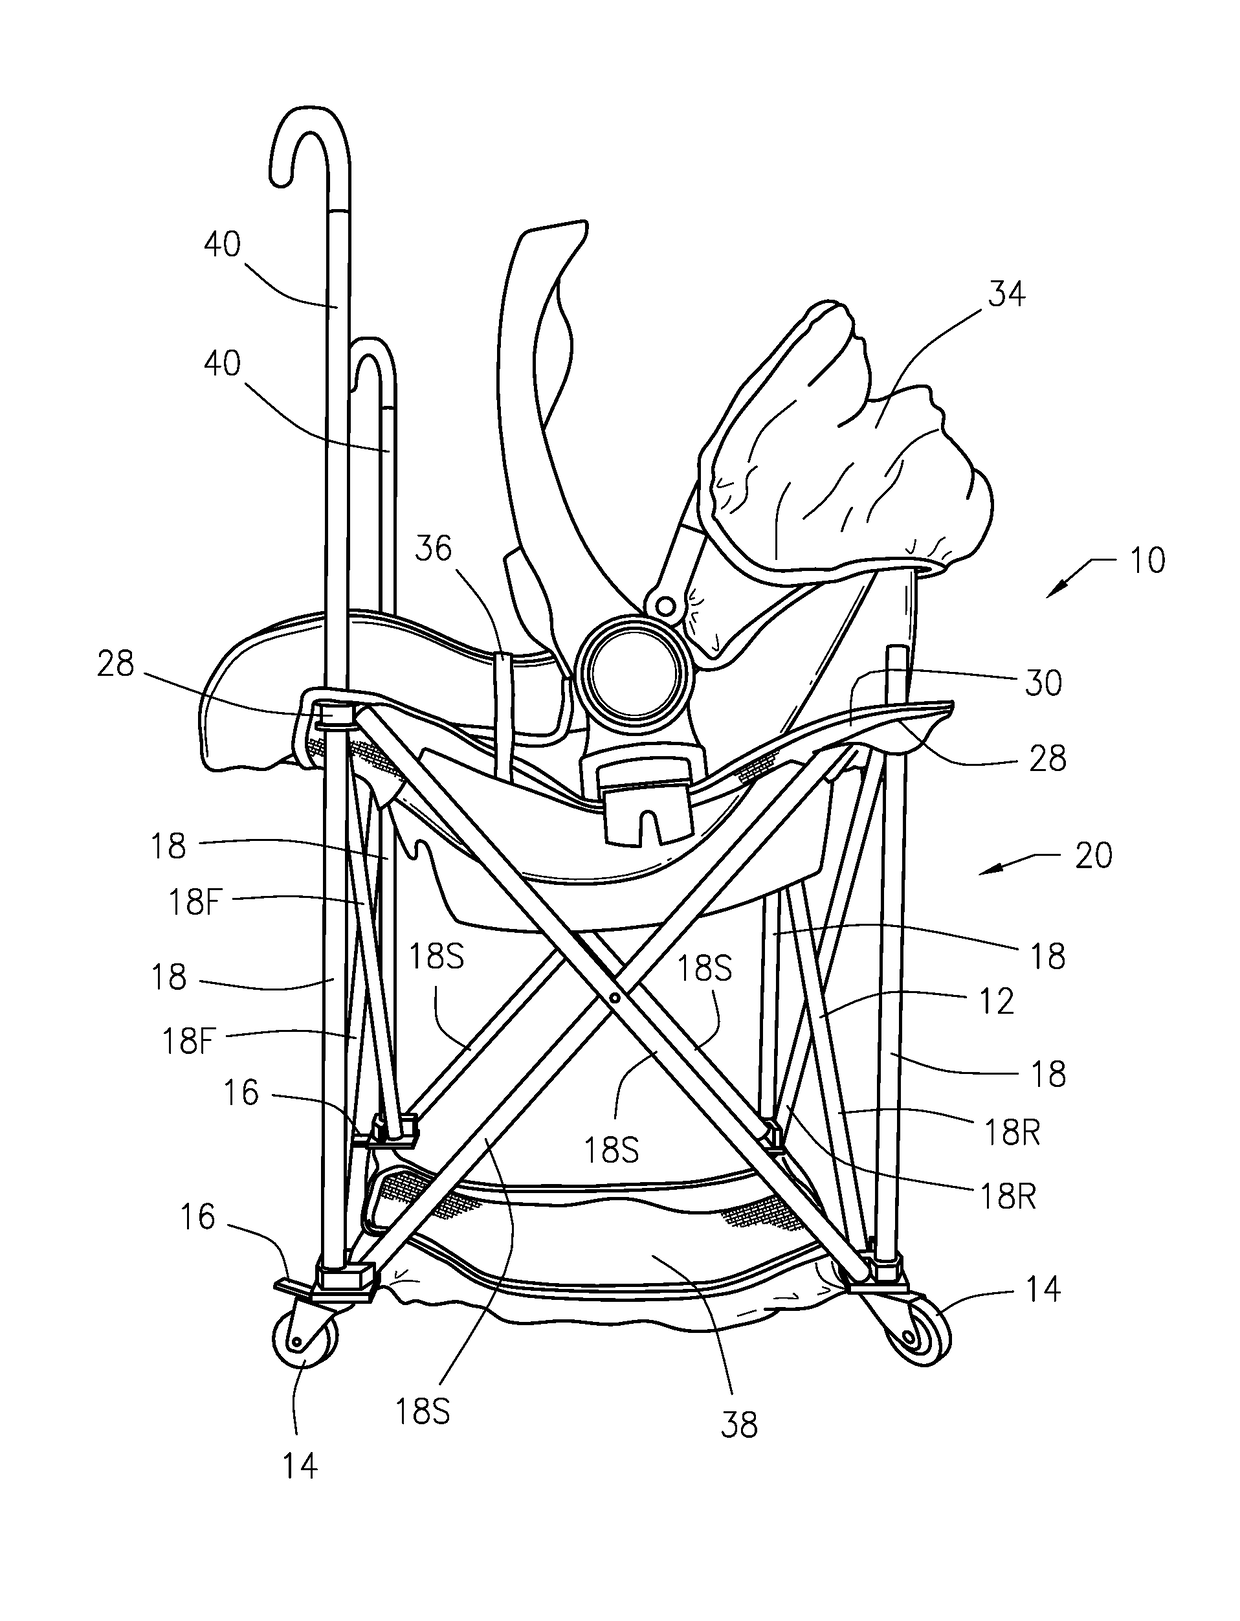 Compact universal infant carrier transporting device